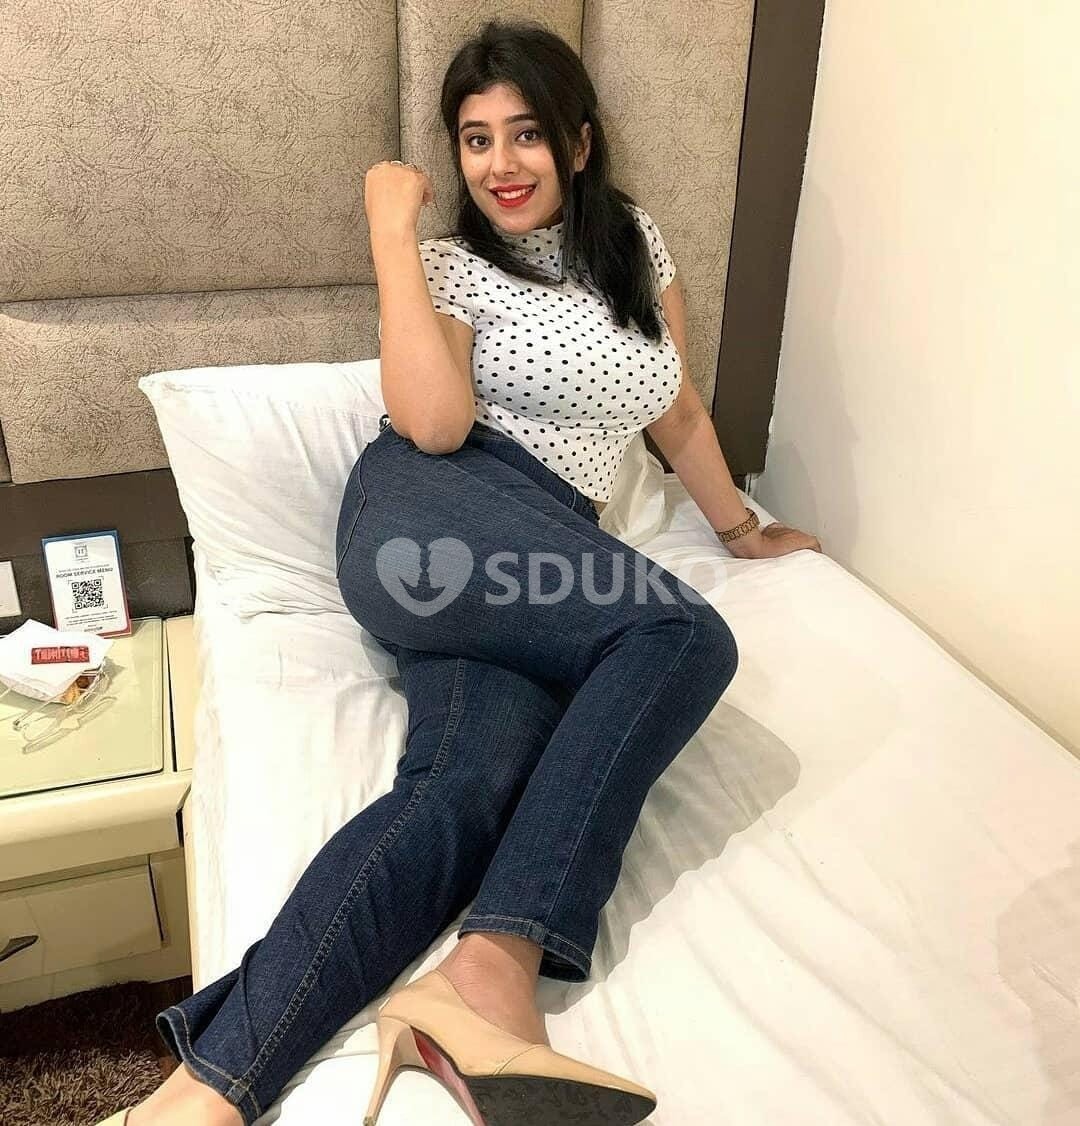 Kochi ⭐☎️ My self Muskan TODAY'S LOW PRICE 100% SAFE AND SECURE GENUINE SERVICE